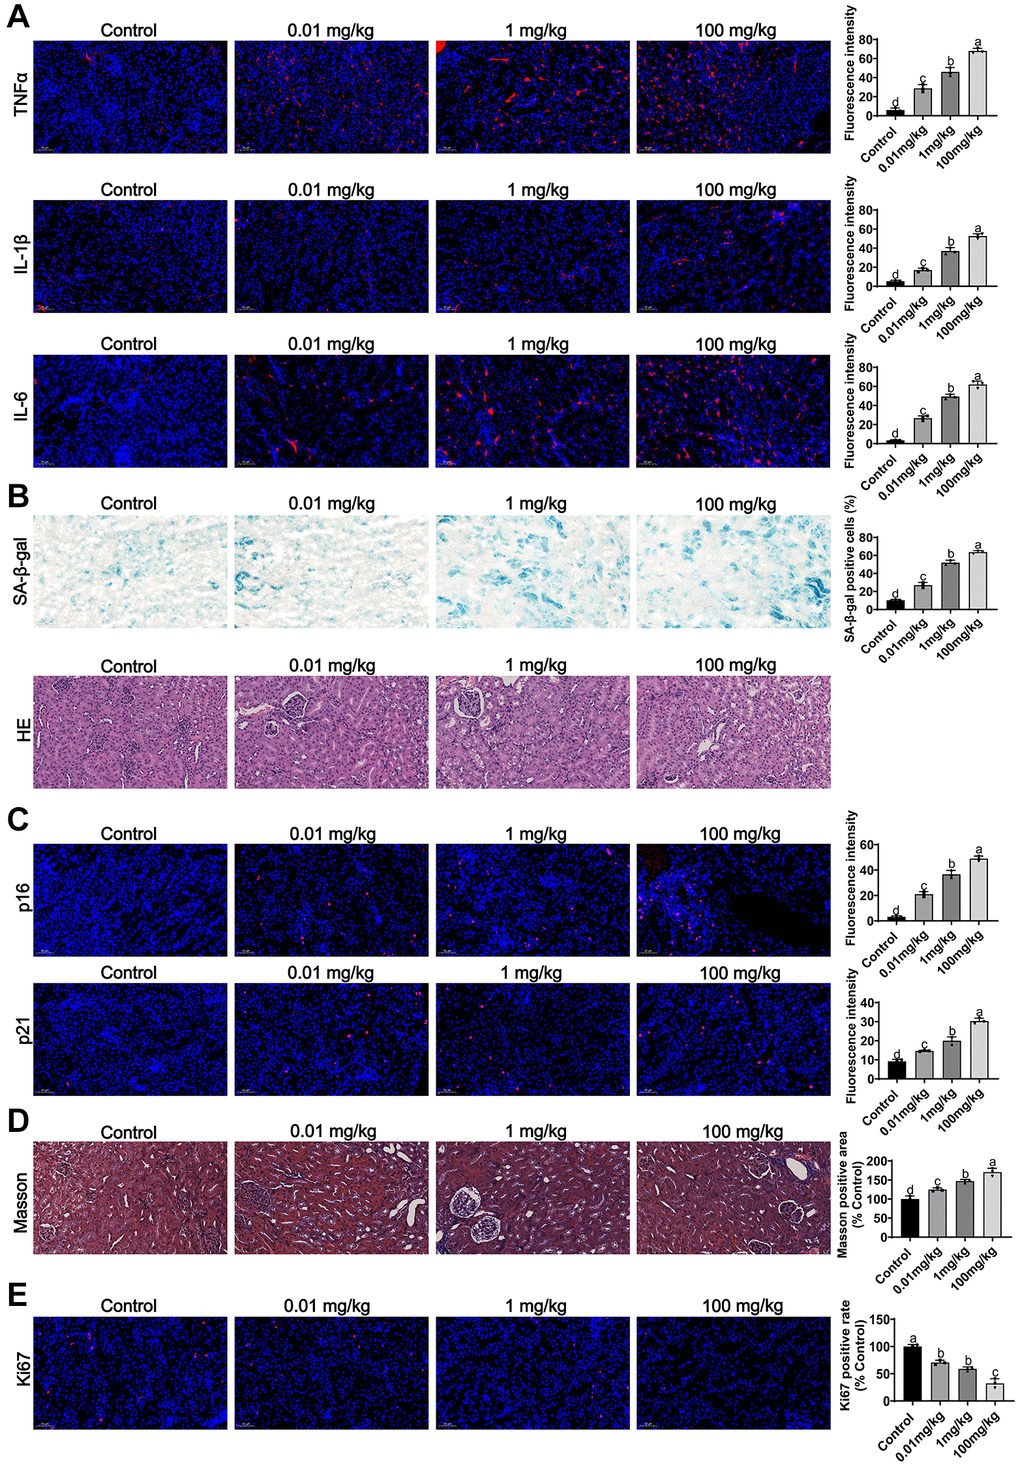 Effects of MCCPs on renal inflammation and aging in vivo. (A) Effect of MCCPs on renal inflammation. (B) Sa-β-gal and HE staining to analyze the effect of MCCPs on renal aging. (C) Effect of MCCPs on renal p21 and p16 expression. (D) Masson staining analysis of the effect of MCCPs on renal fibrosis. (E) The effect of MCCPs on Ki67 expression in vivo. p 